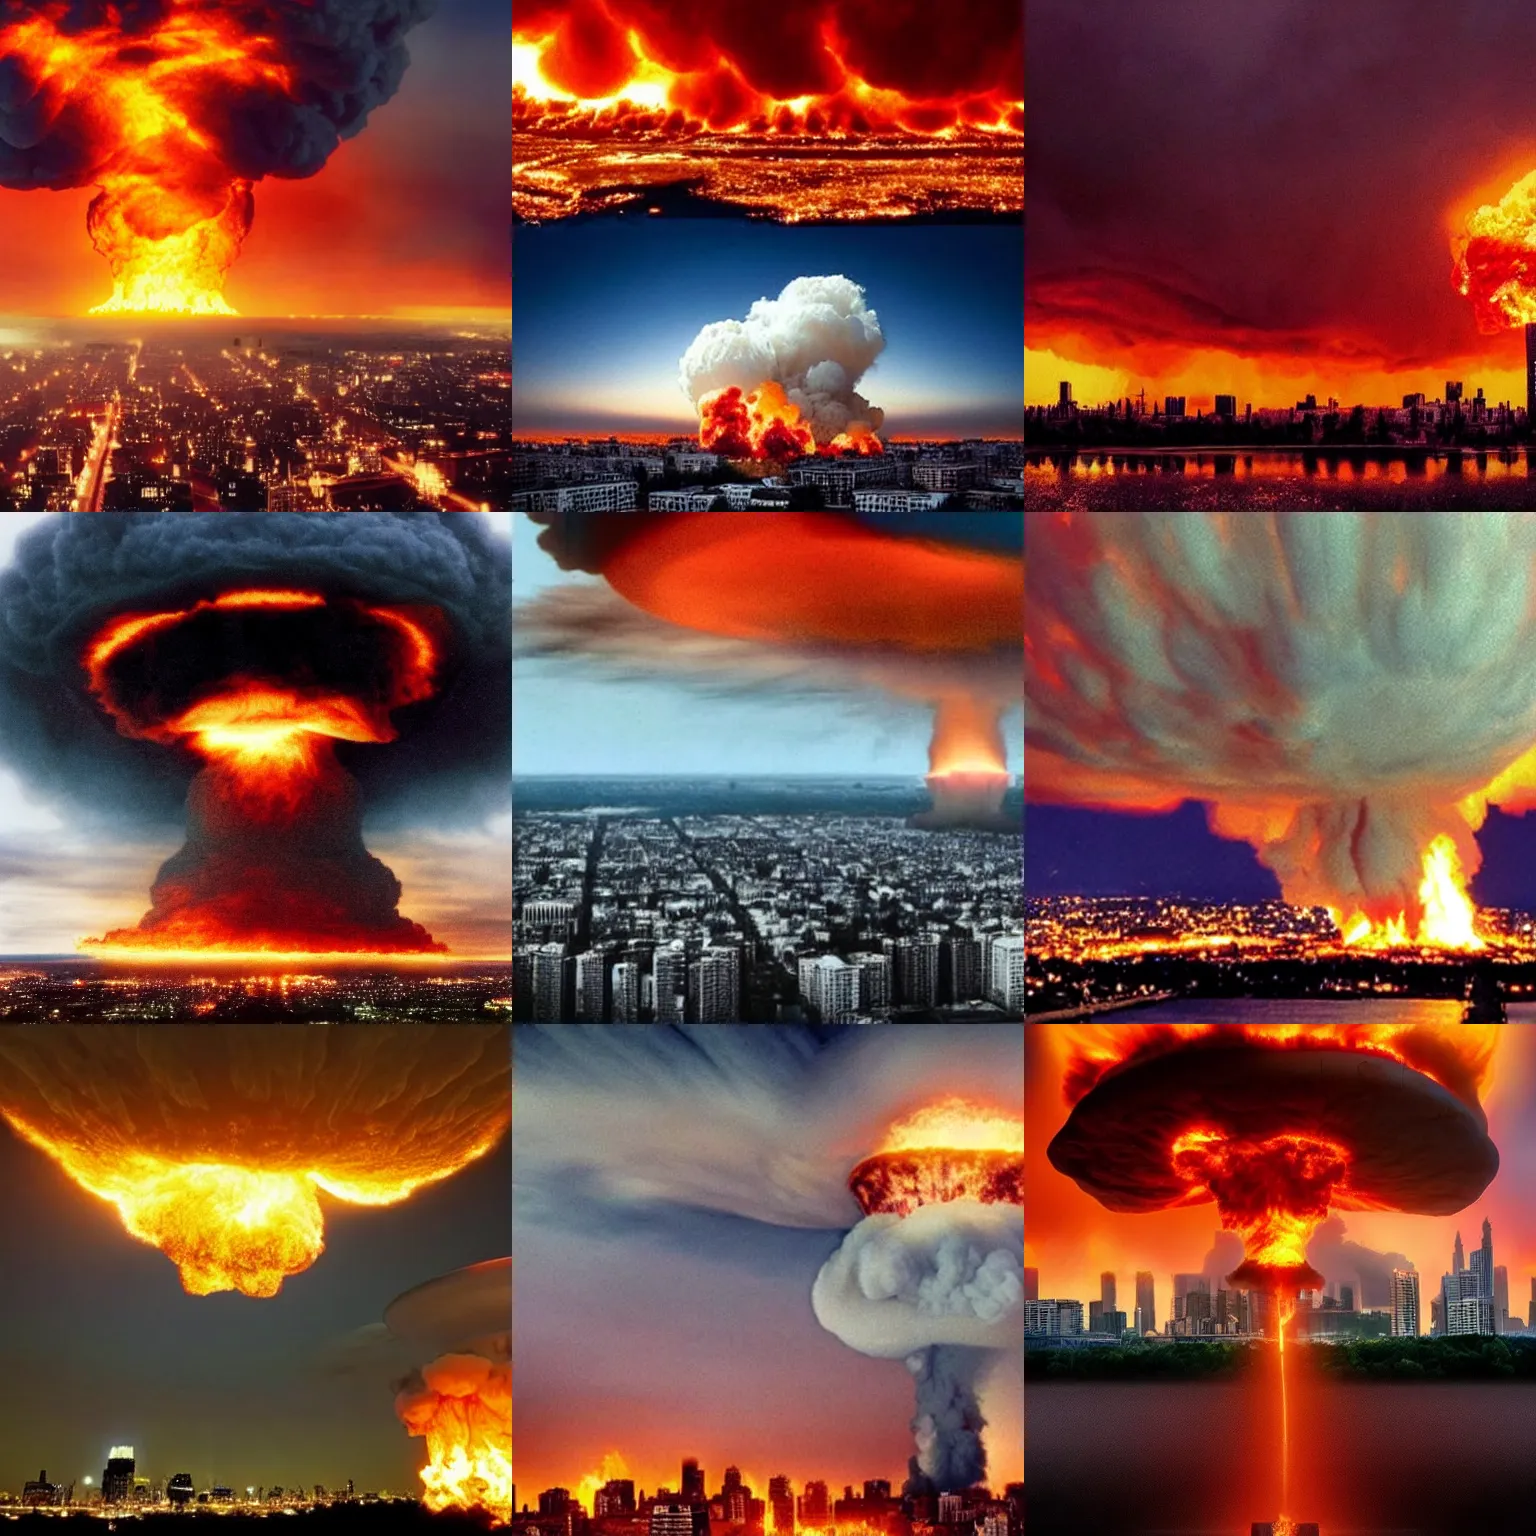 Prompt: a nuclear mushroom cloud rises over a city engulfed in flames, modern picture taken from far away